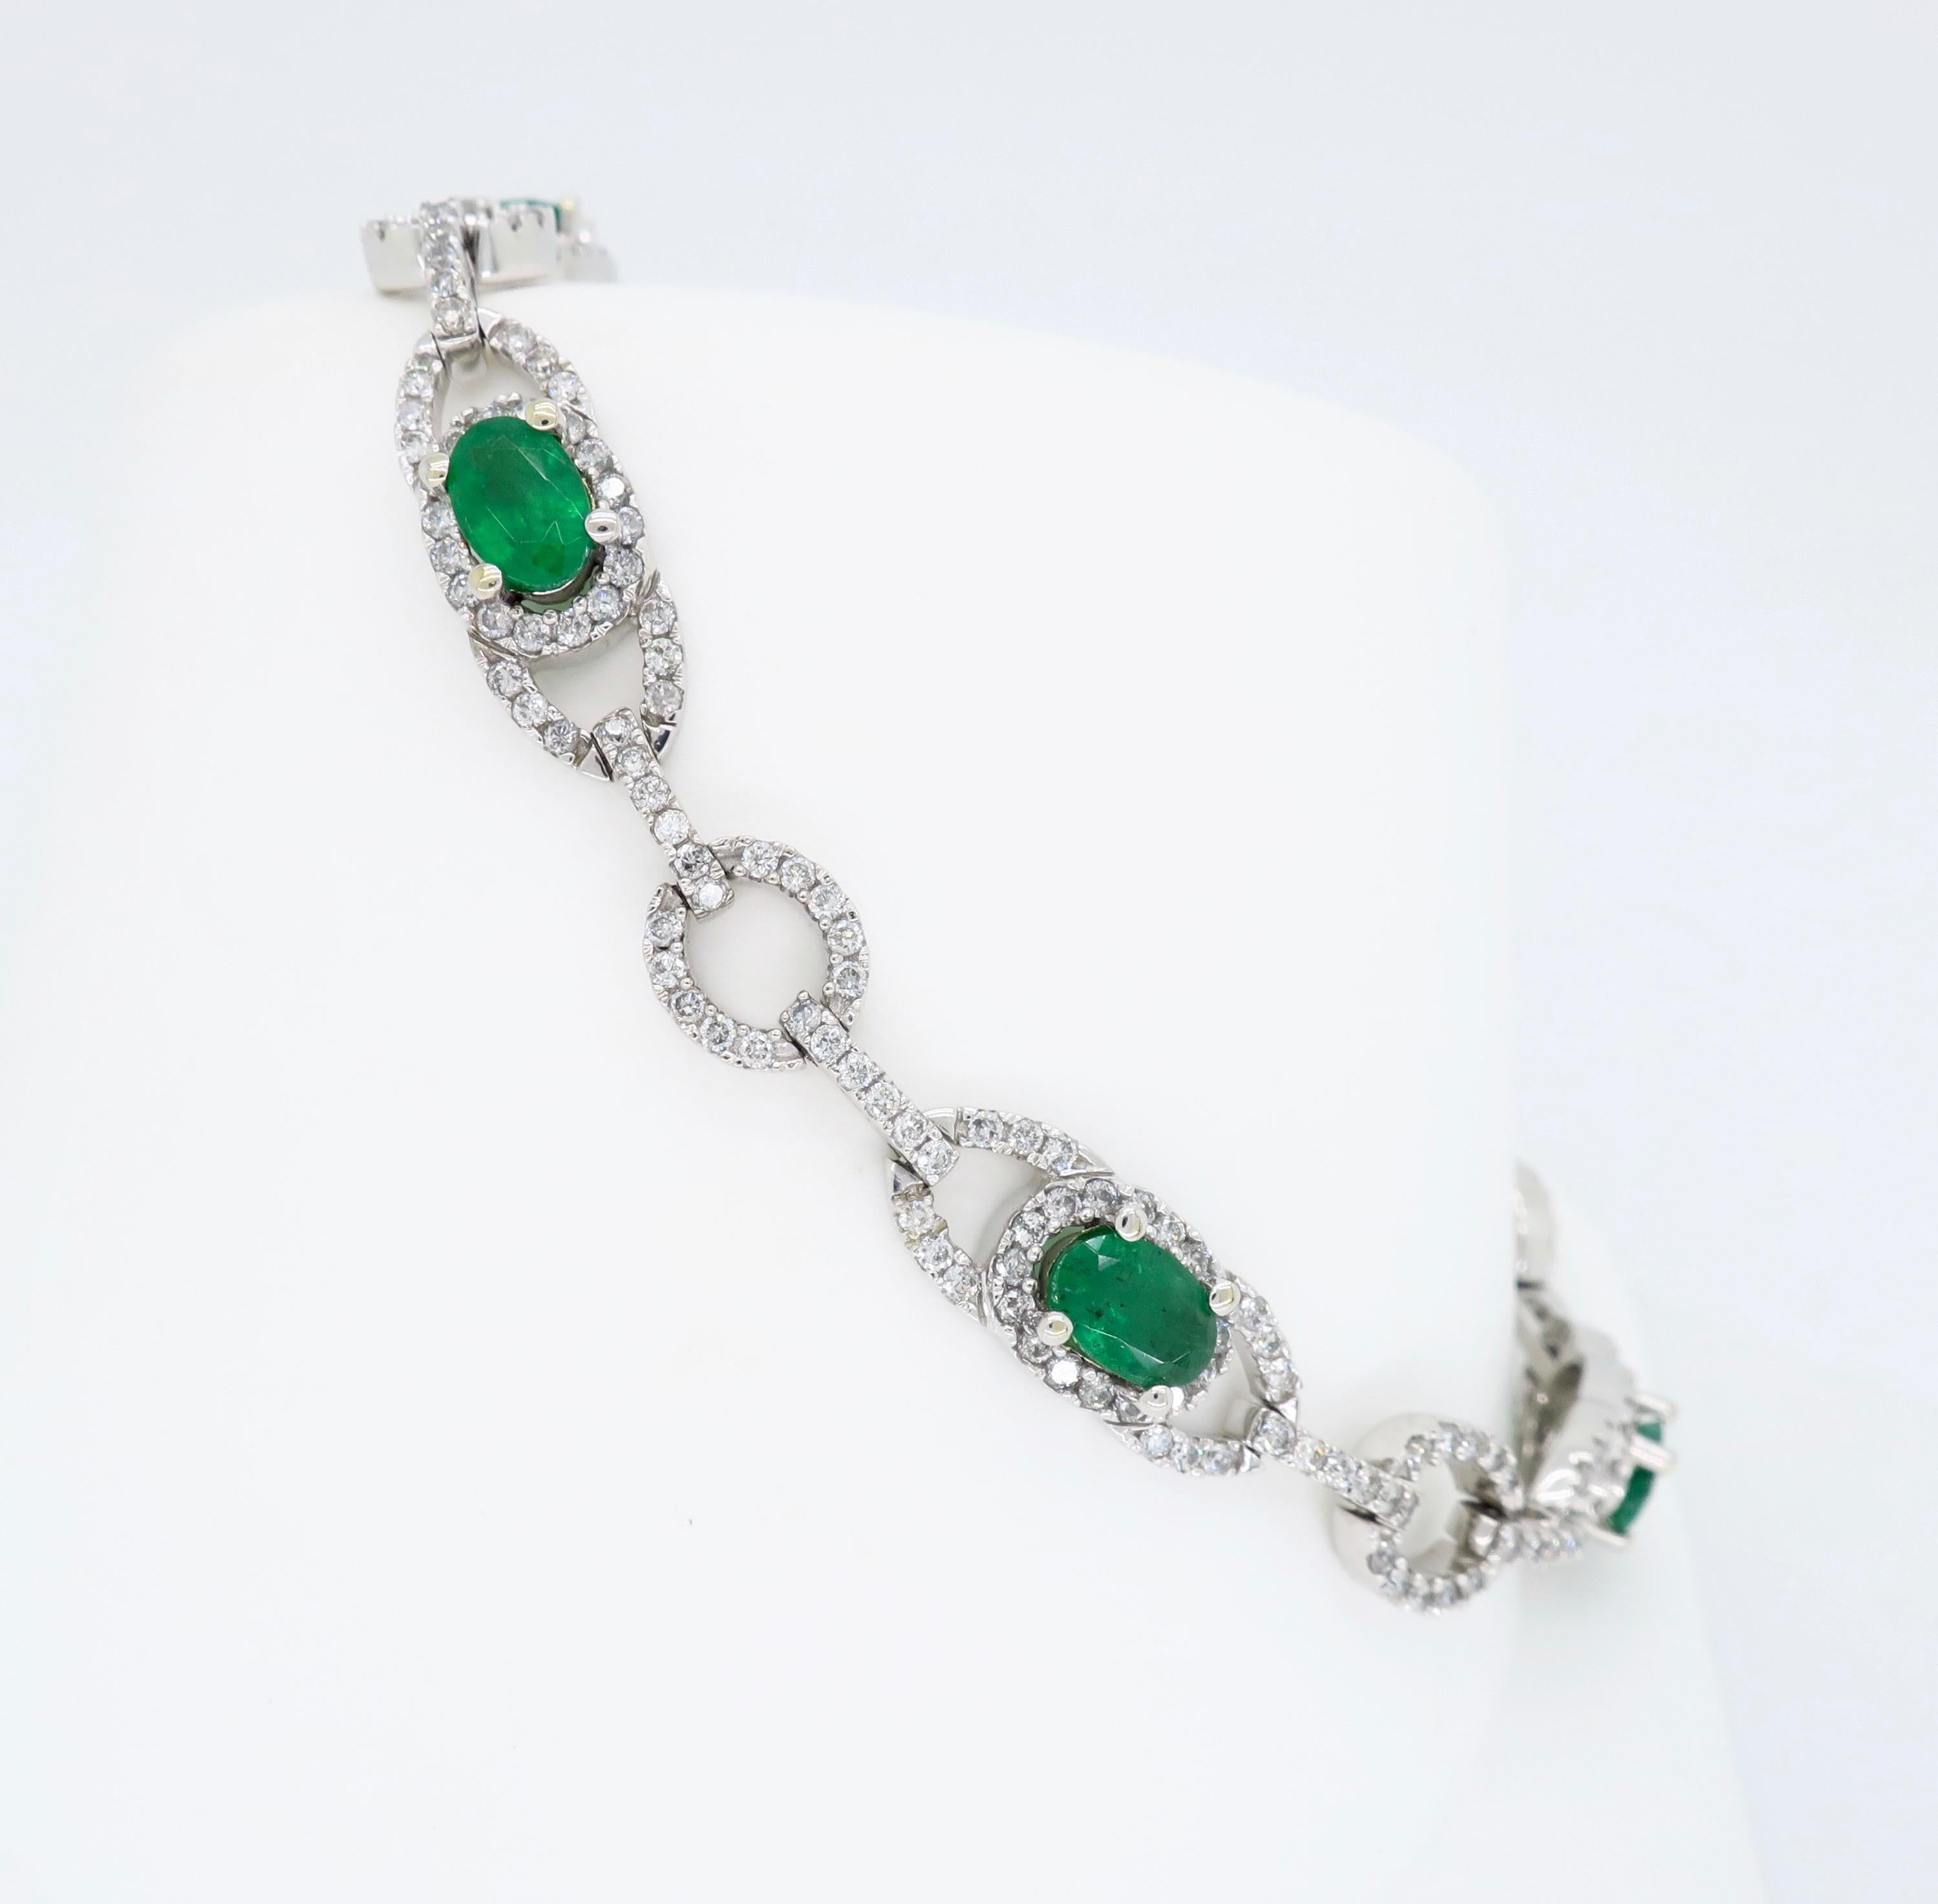 This stunning bracelet features 2.50CTW of oval cut emeralds  surrounded by approximately 2.05CTW of Round Brilliant Cut Diamonds.

Gemstone: Emerald & Diamond
Gemstone Carat Weight: 6 Oval Cut Emeralds, 2.50CTW 
Diamond Cut: Round Brilliant Cut